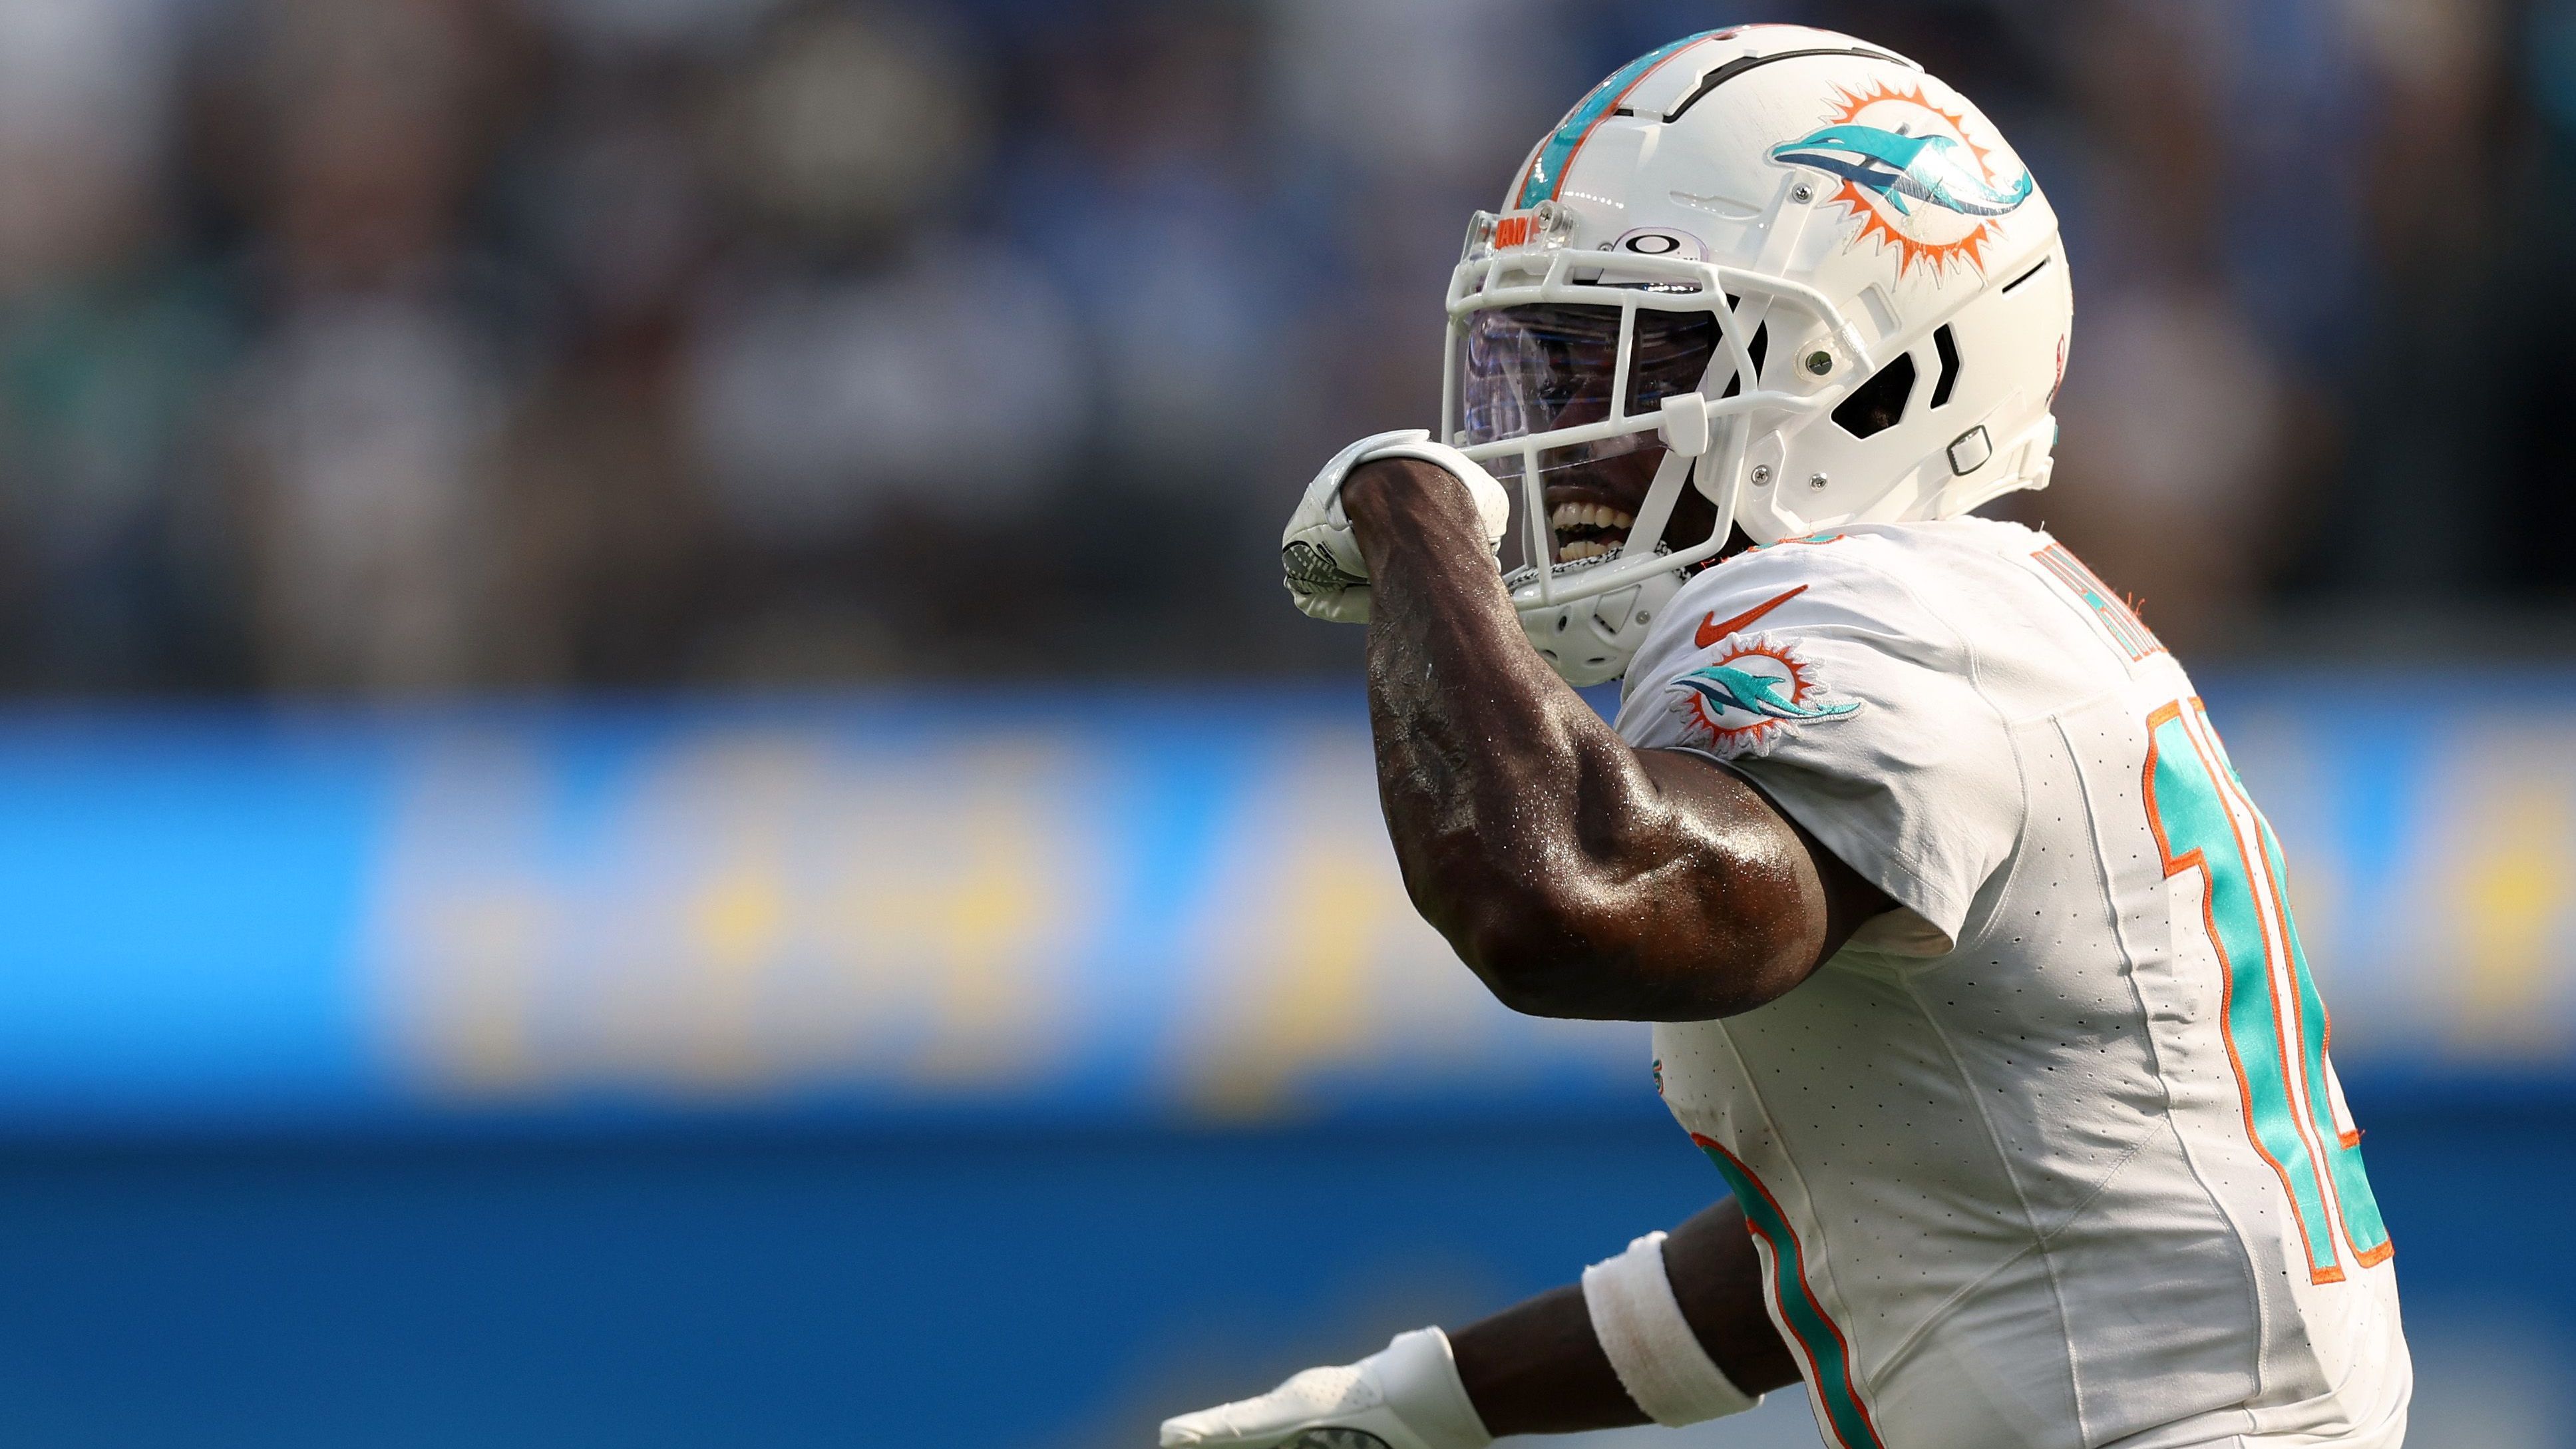 <strong>Receiving Yards<br></strong>1. Tyreek Hill (Foto, Miami Dolphins) - 1.799 Yards<br>2. CeeDee Lamb (Dallas Cowboys) - 1.749 Yards<br>3. Amon-Ra St. Brown (Detroit Lions) - 1,515 Yards<br>4. Puka Nacua (Los Angeles Rams) - 1.486 Yards<br>5. A.J. Brown (Philadelphia Eagles) - 1.456 Yards